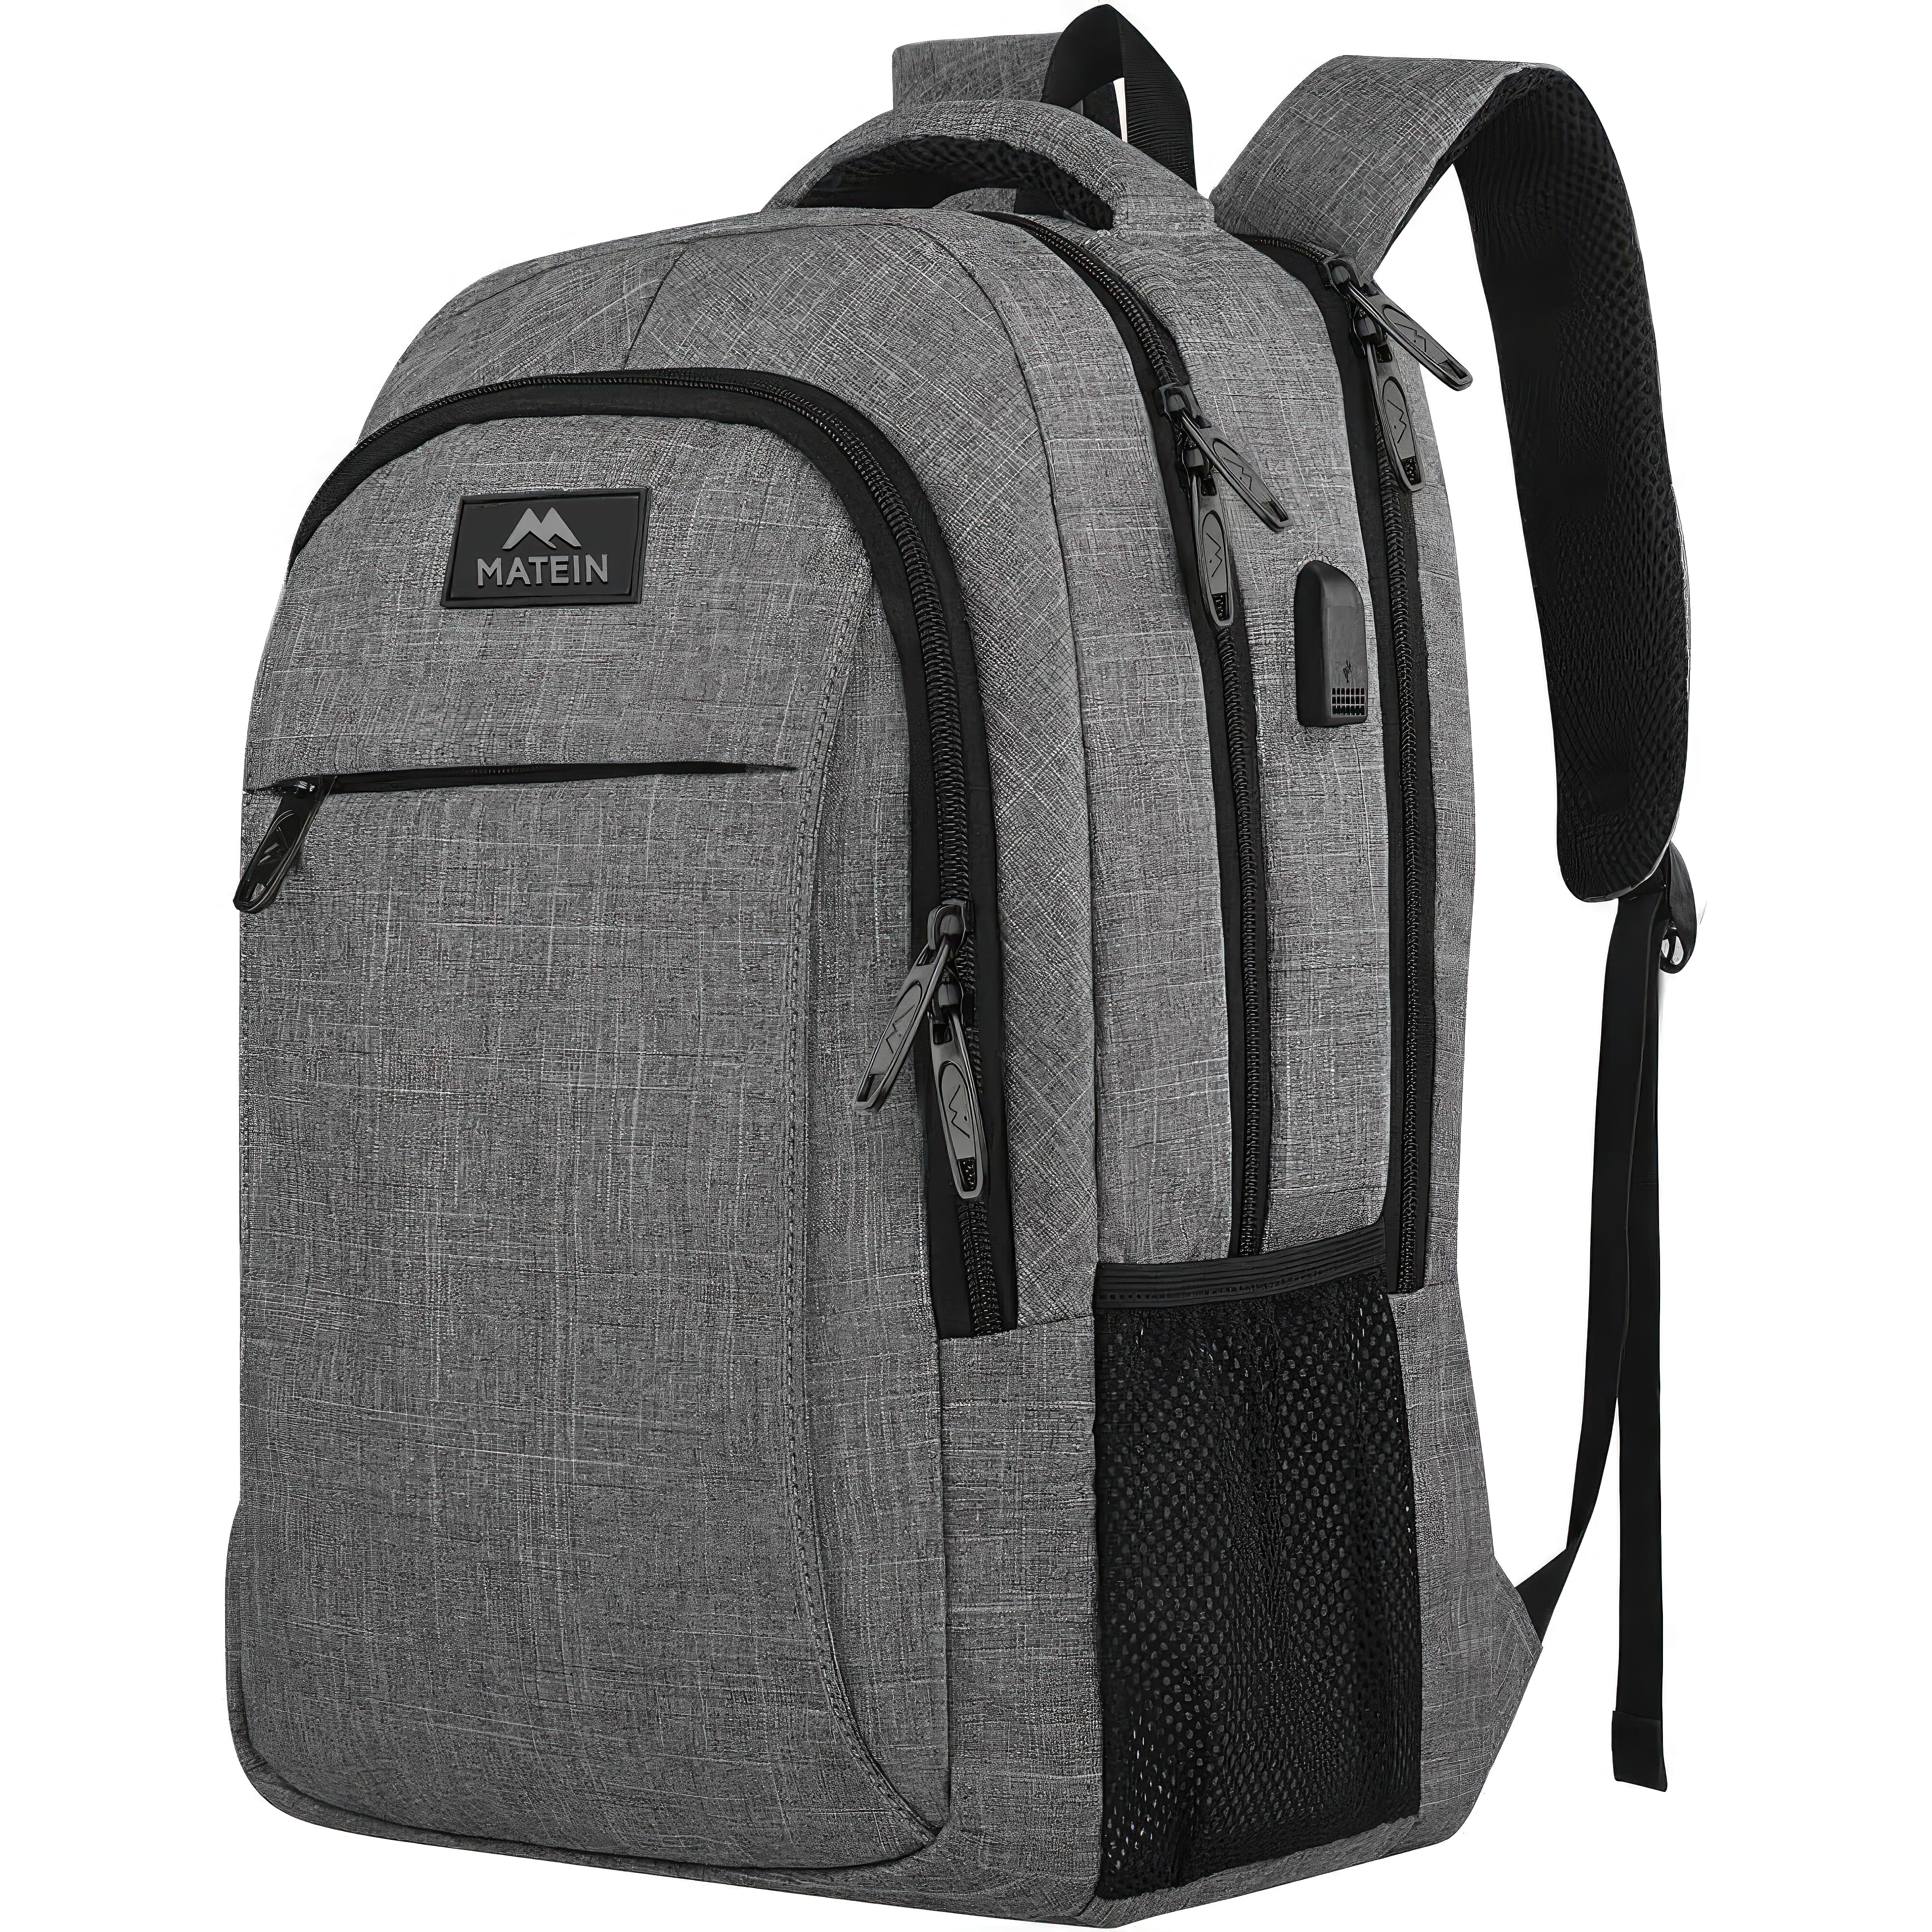 MATEIN Anti Theft Slim & Durable Travel Laptop Backpack